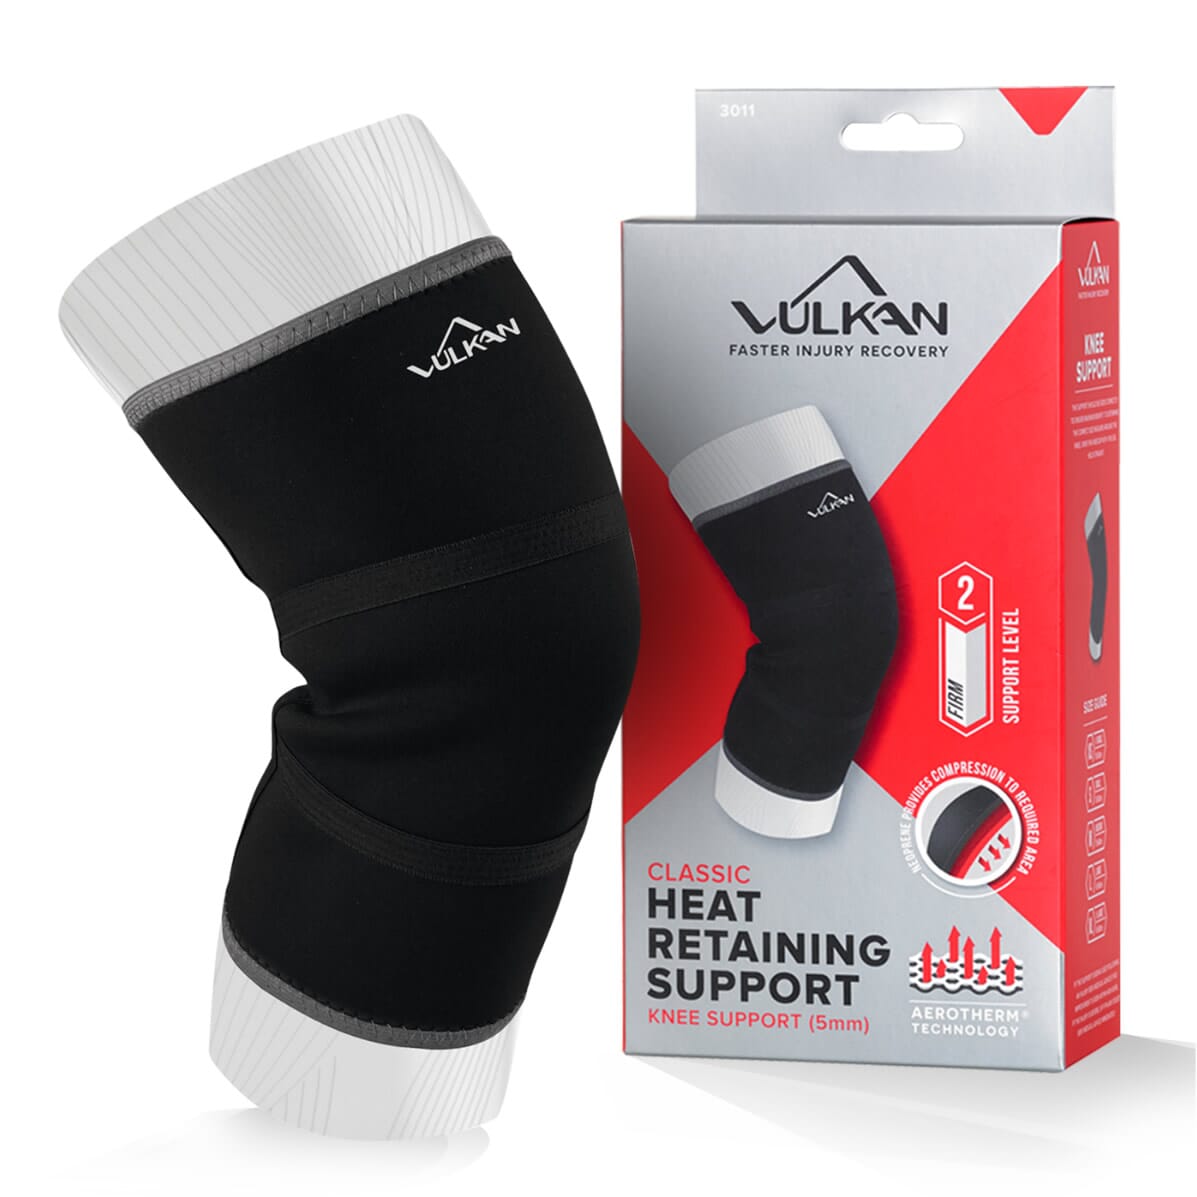 View Knee Support Vulkan Large 3mm thick information